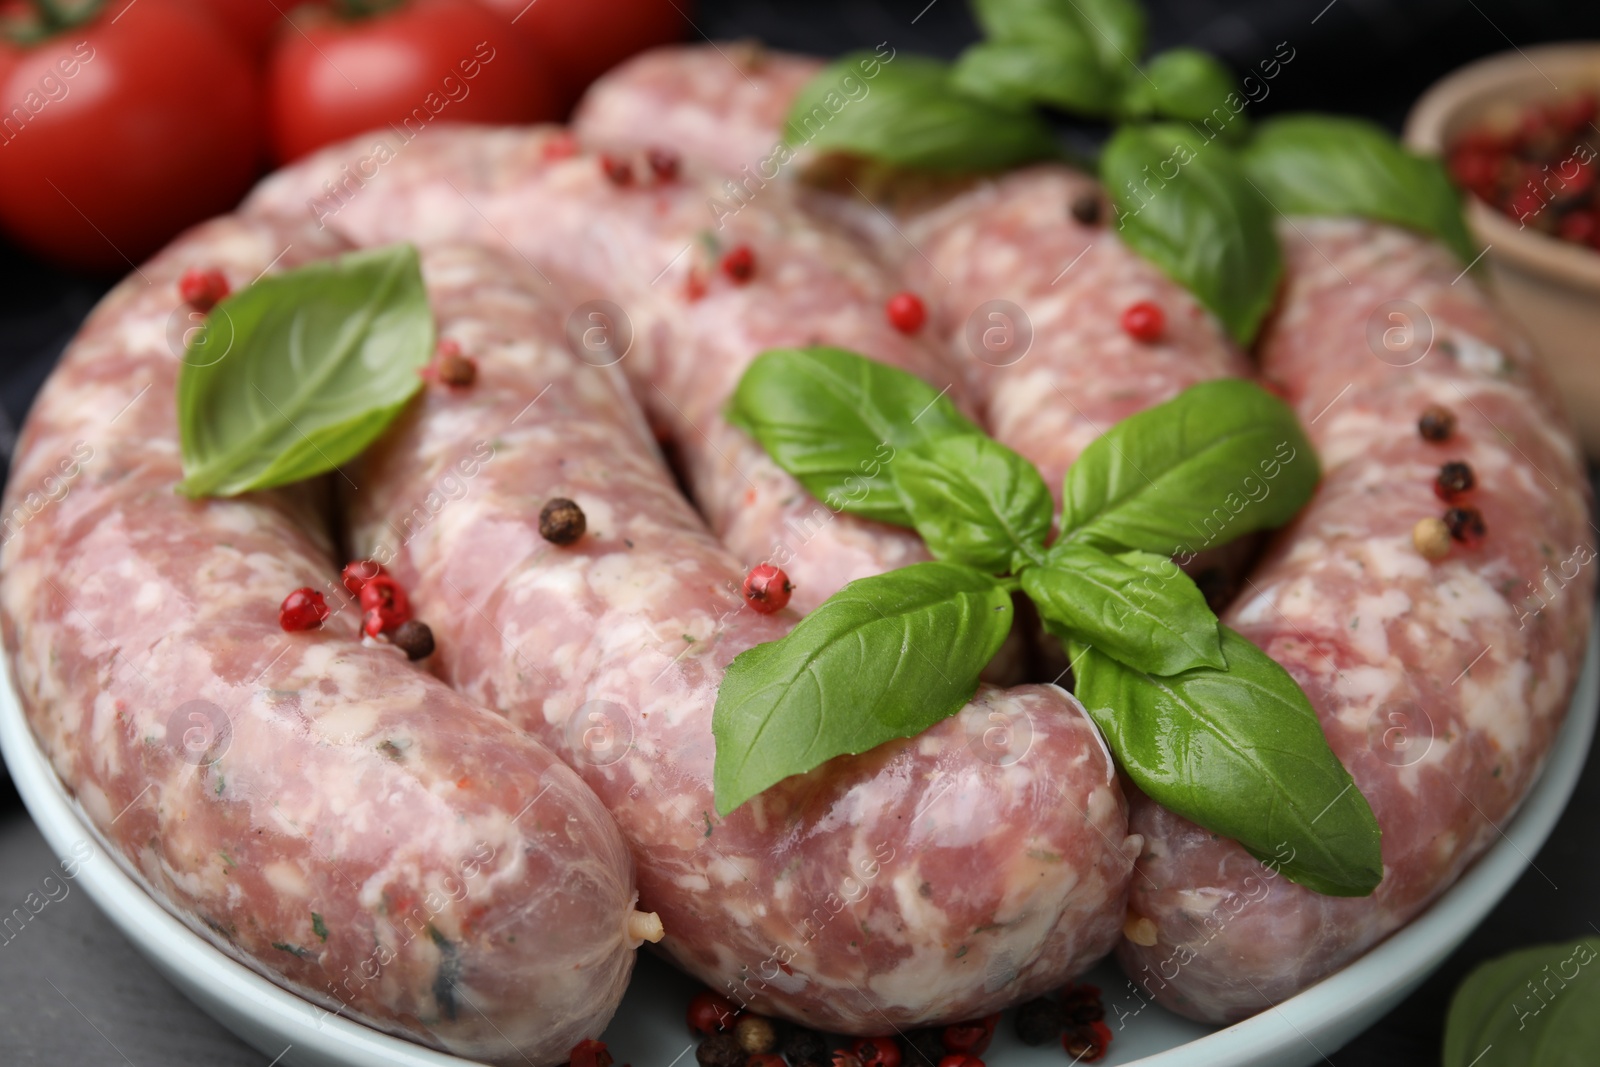 Photo of Raw homemade sausages, basil leaves and peppercorns on table, closeup